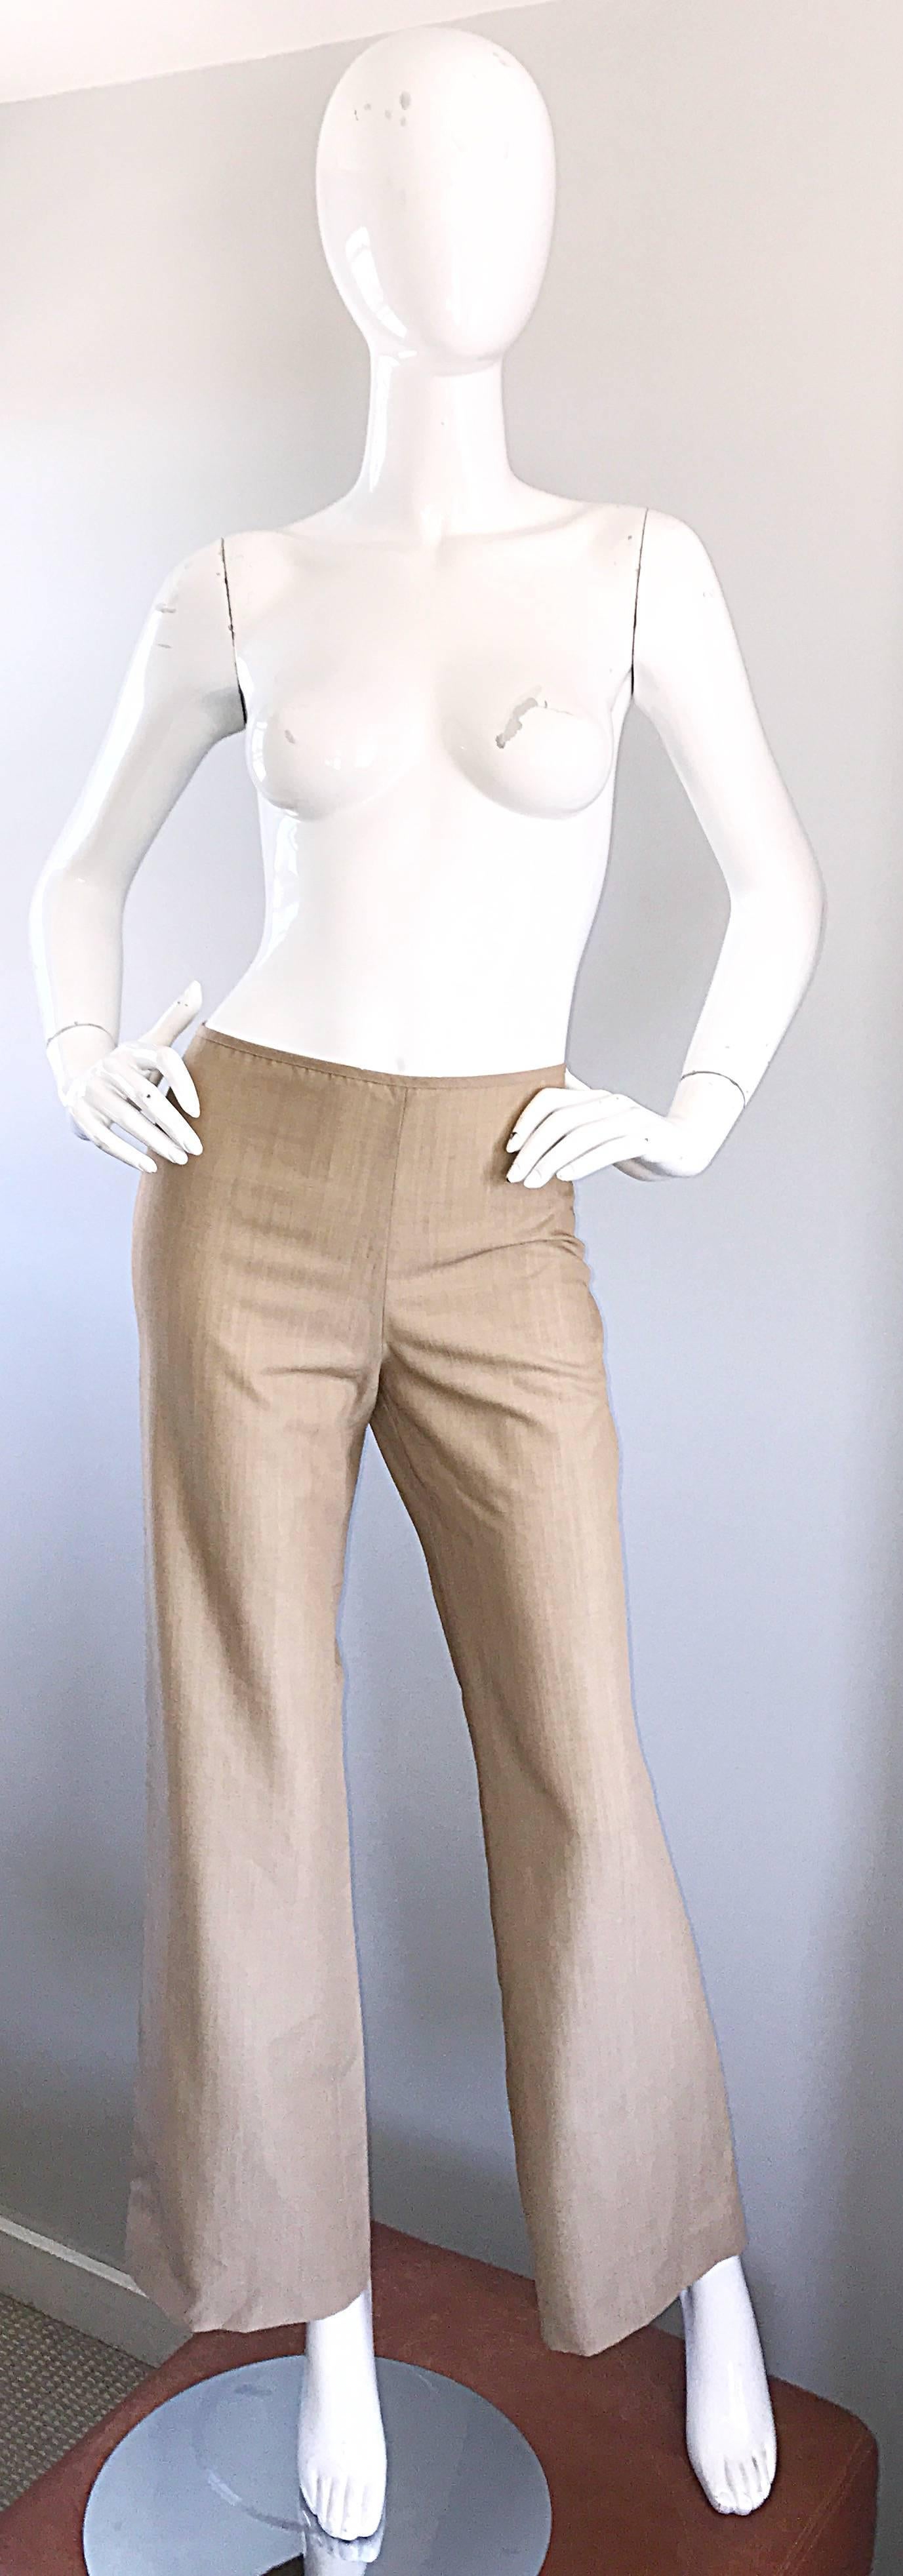 Chic vintage 90s JEAN PAUL GAULTIER high waisted wide leg lightweight virgin wool Flat front trousers! Features the softest lightweight virgin wool that is perfect all year. Flattering and stylish high waisted fit, with a chic flared leg. Hidden